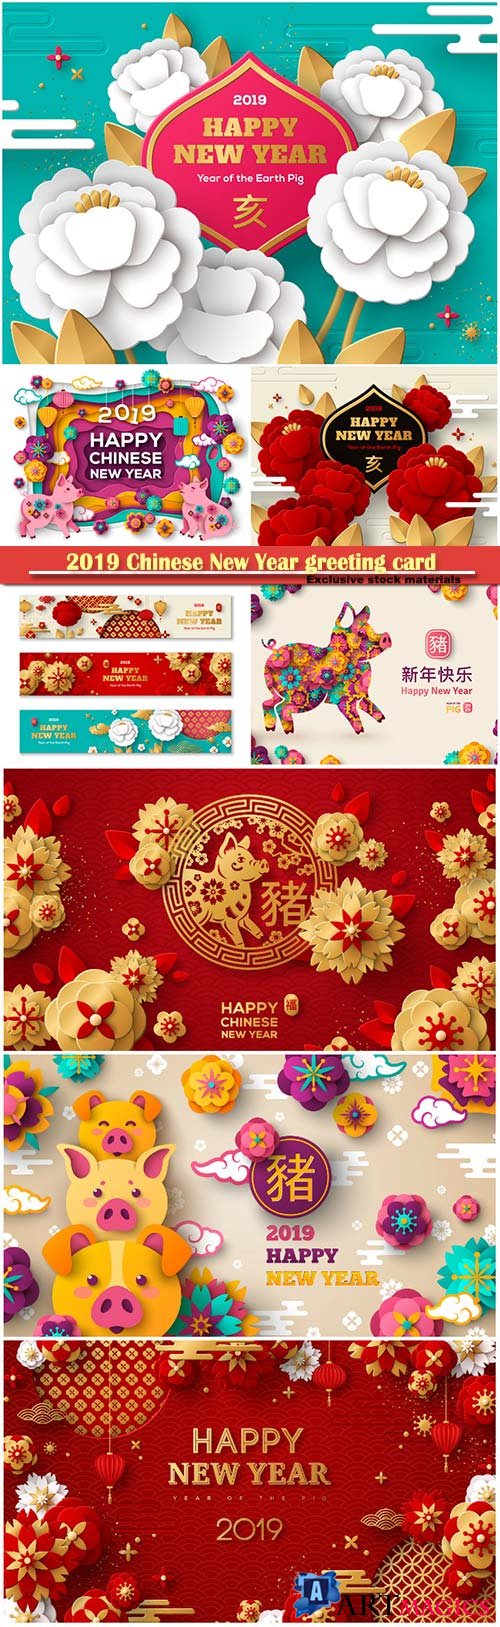 2019 Chinese New Year greeting card, happy New Year illustration